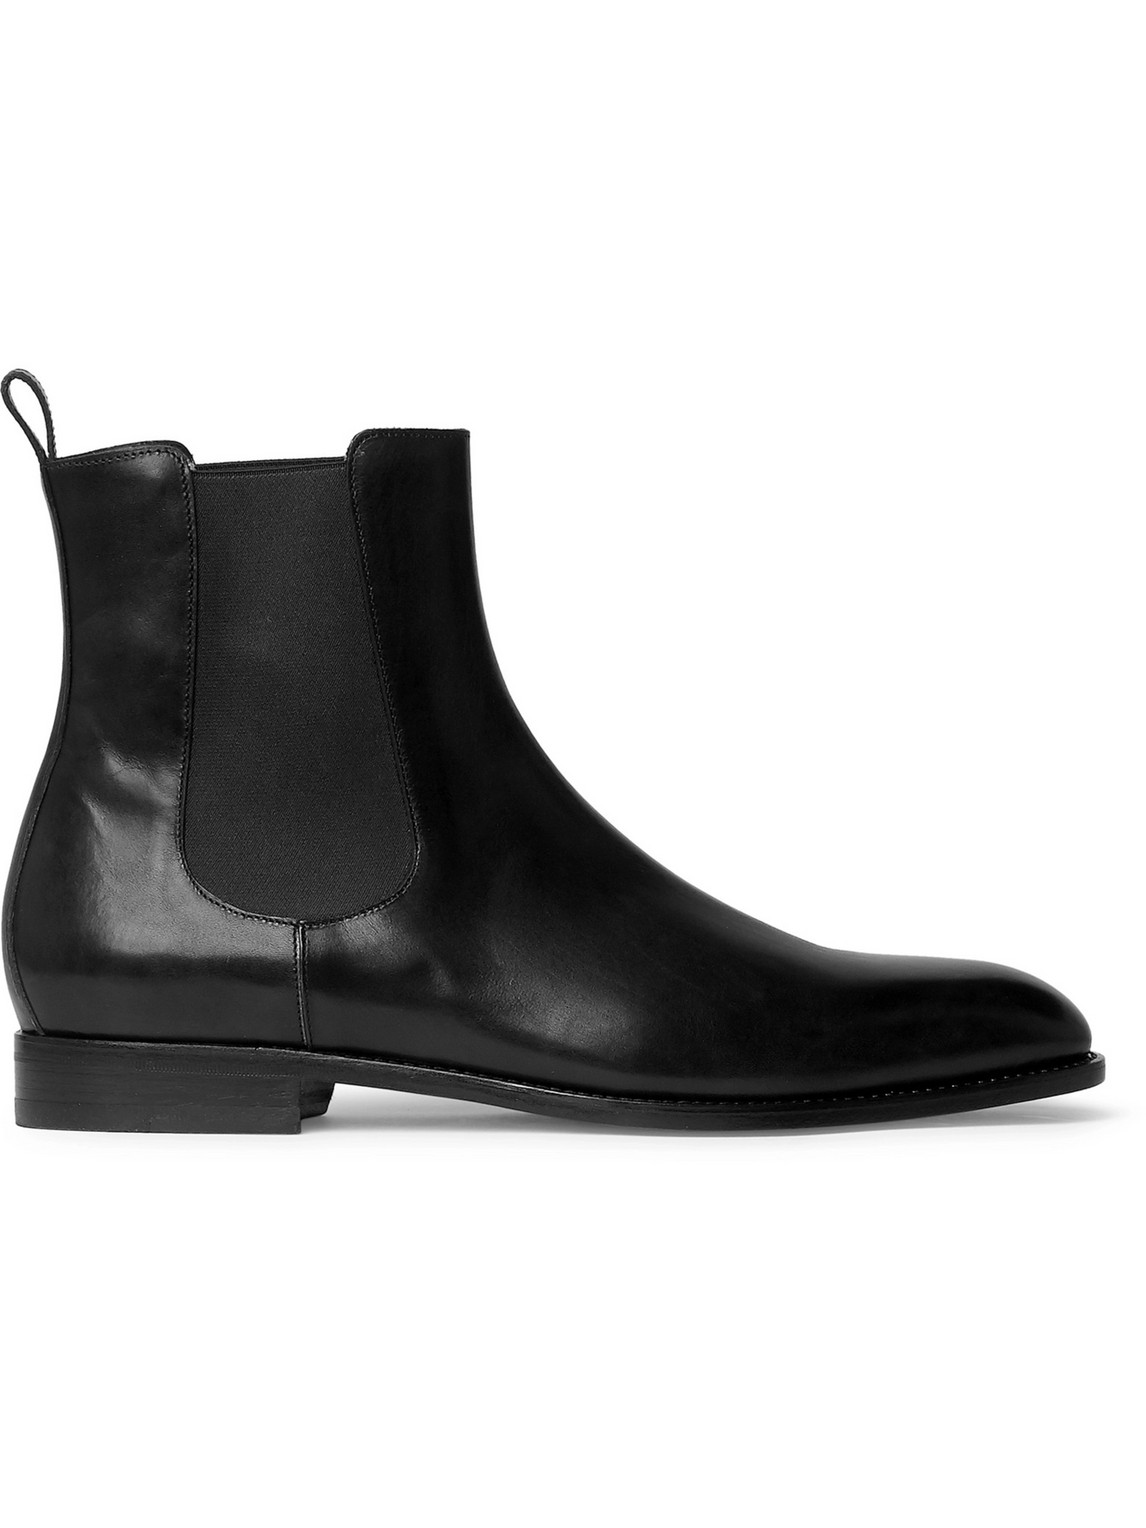 Delsa Polished-Leather Chelsea Boots